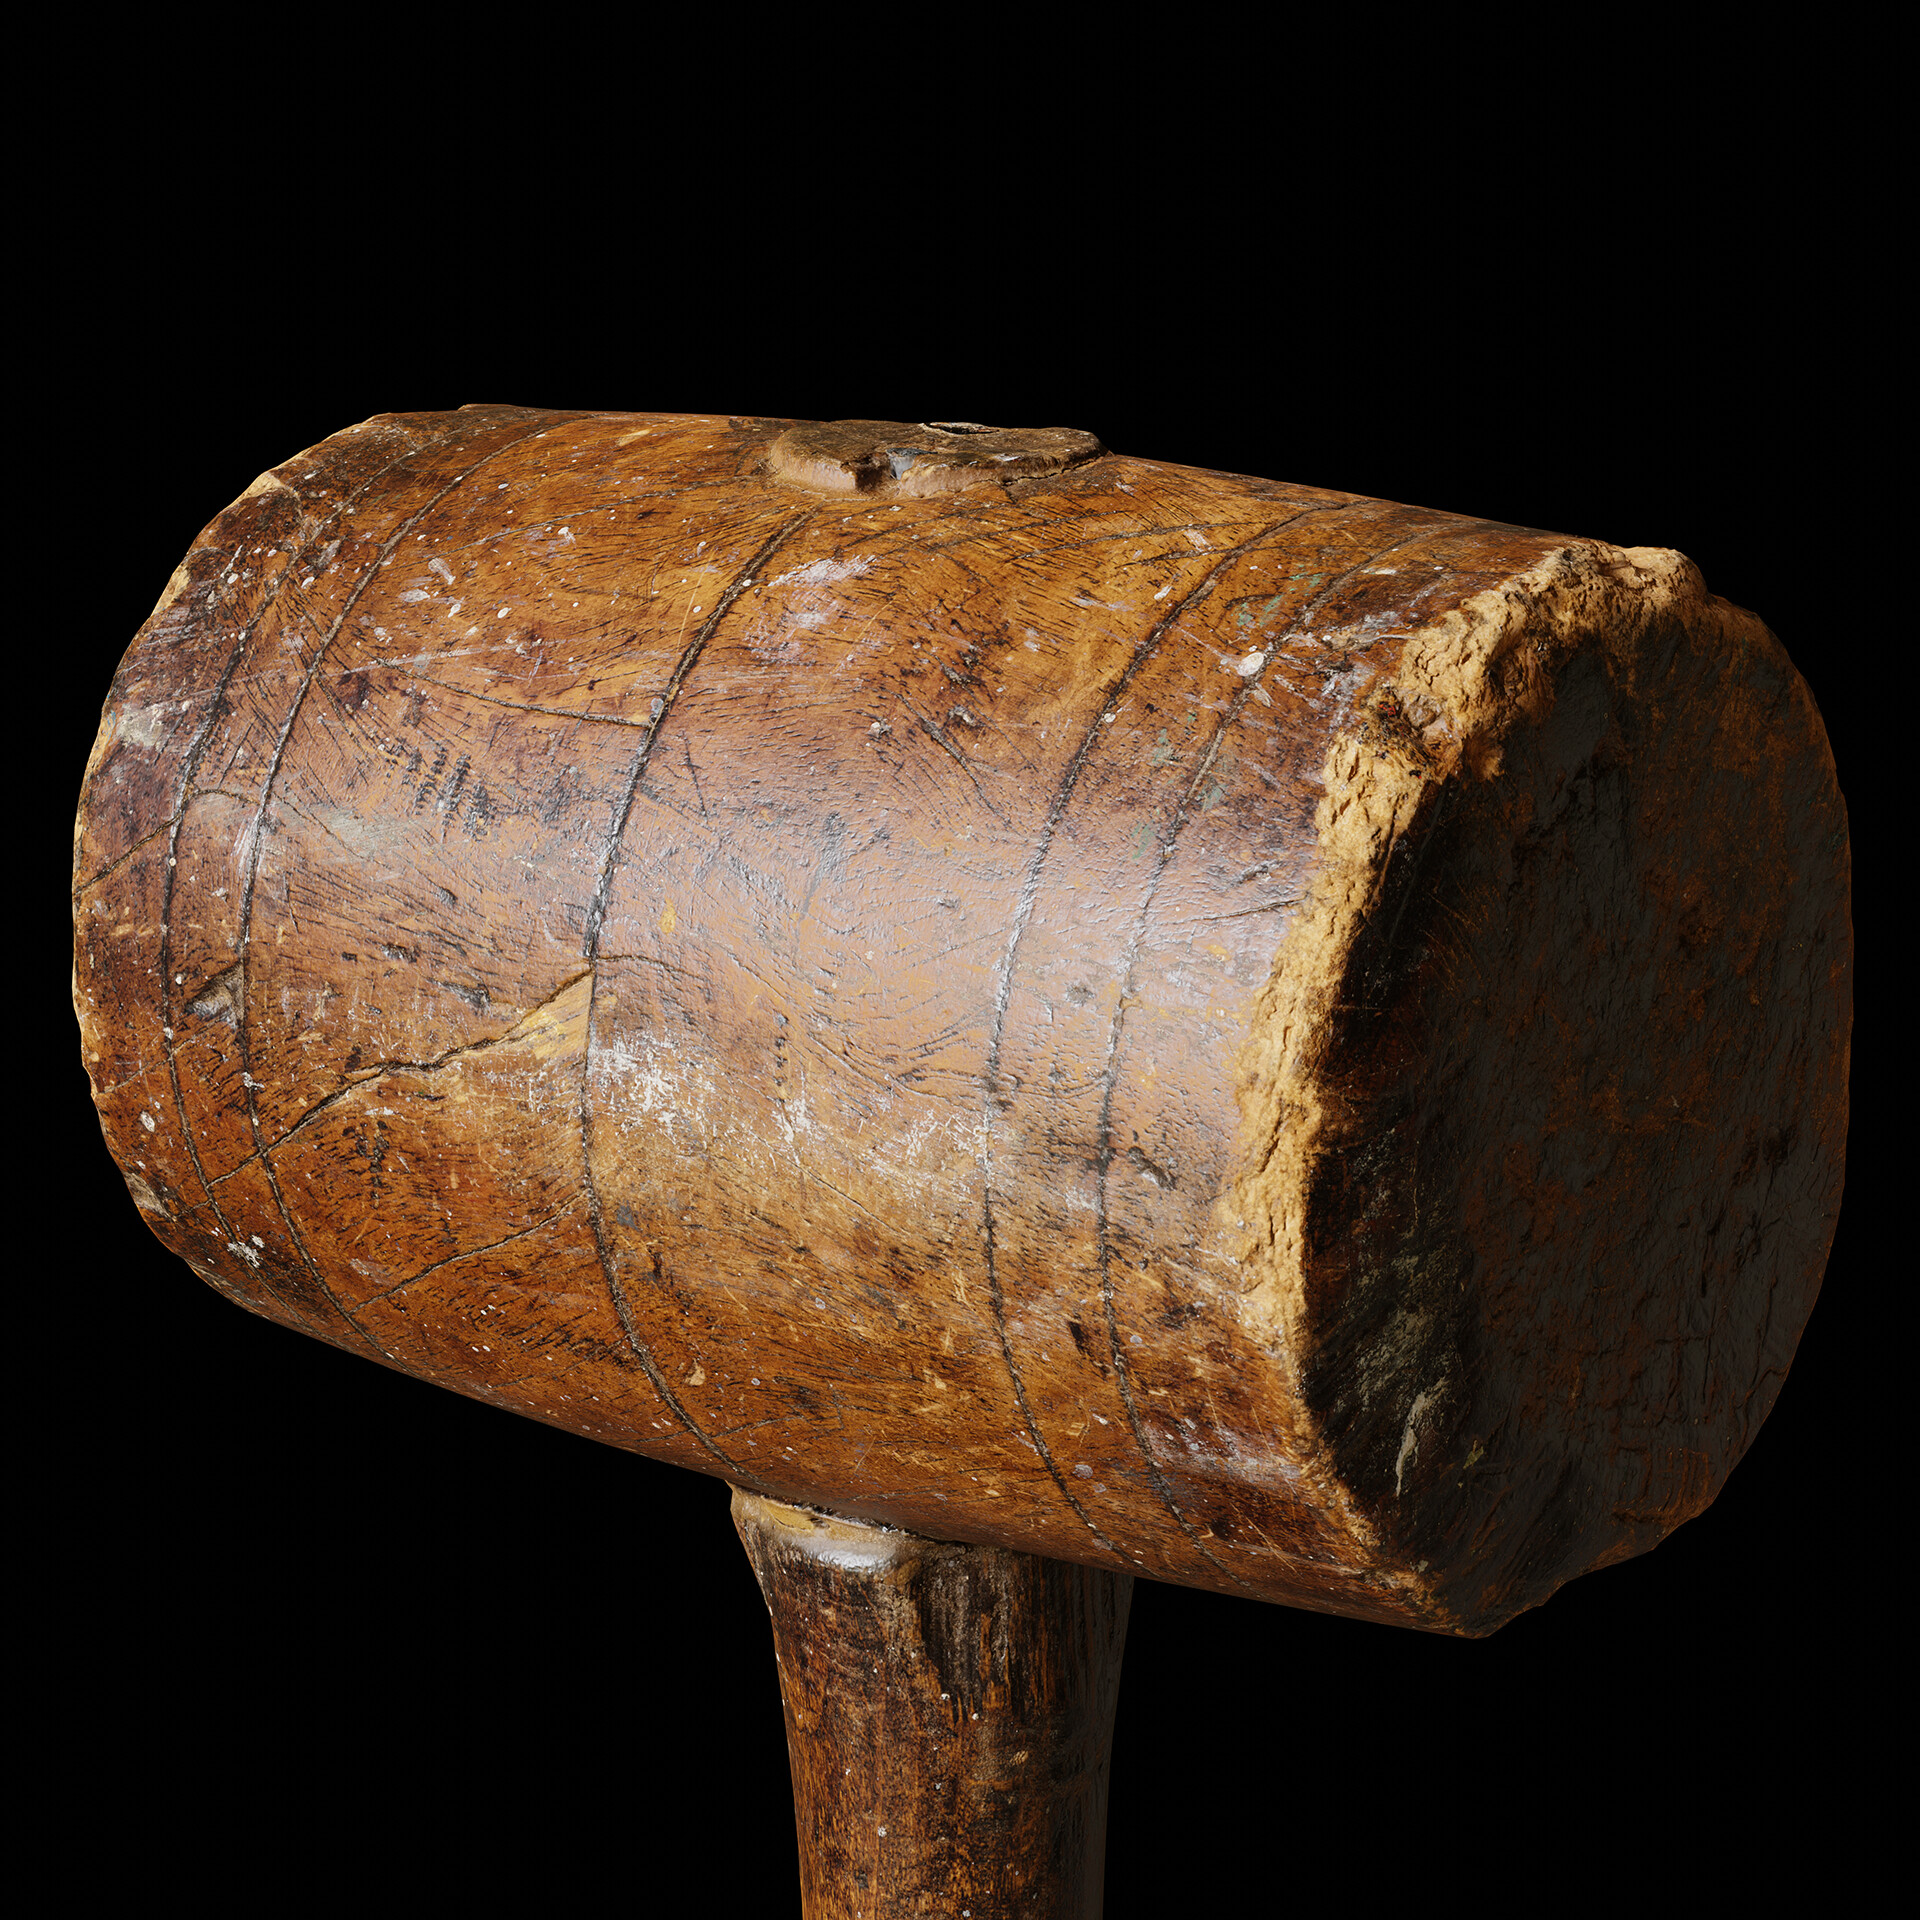 Wooden Mallet for Sale